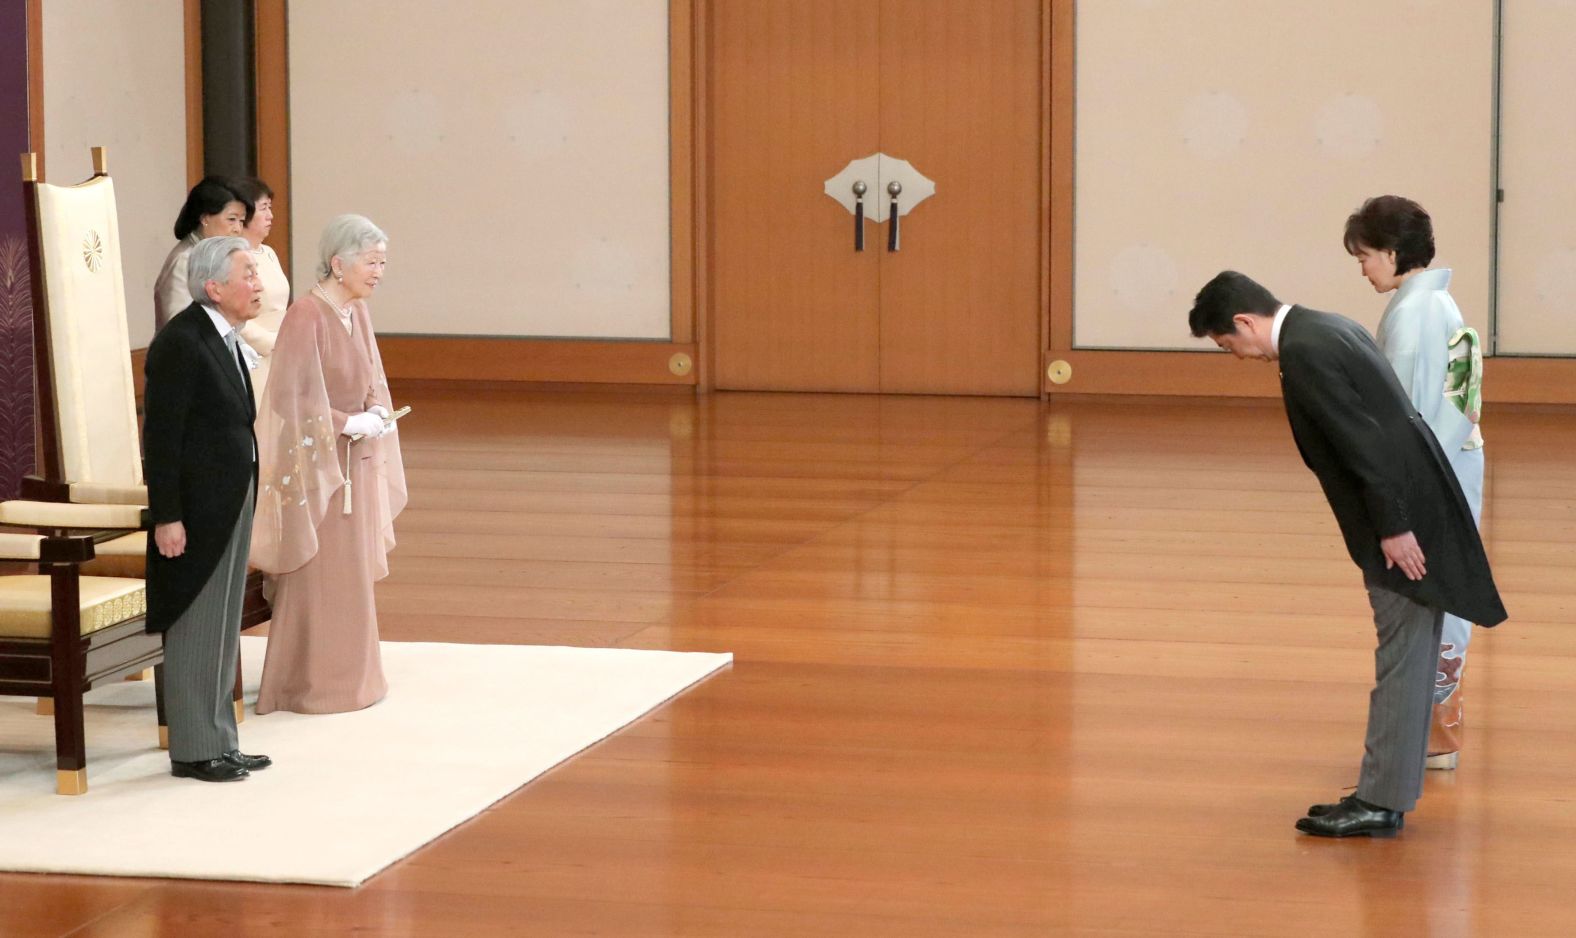 Abe and his wife, Akie, greet Japanese Emperor Akihito and Empress Michiko on their 60th wedding anniversary in 2019.